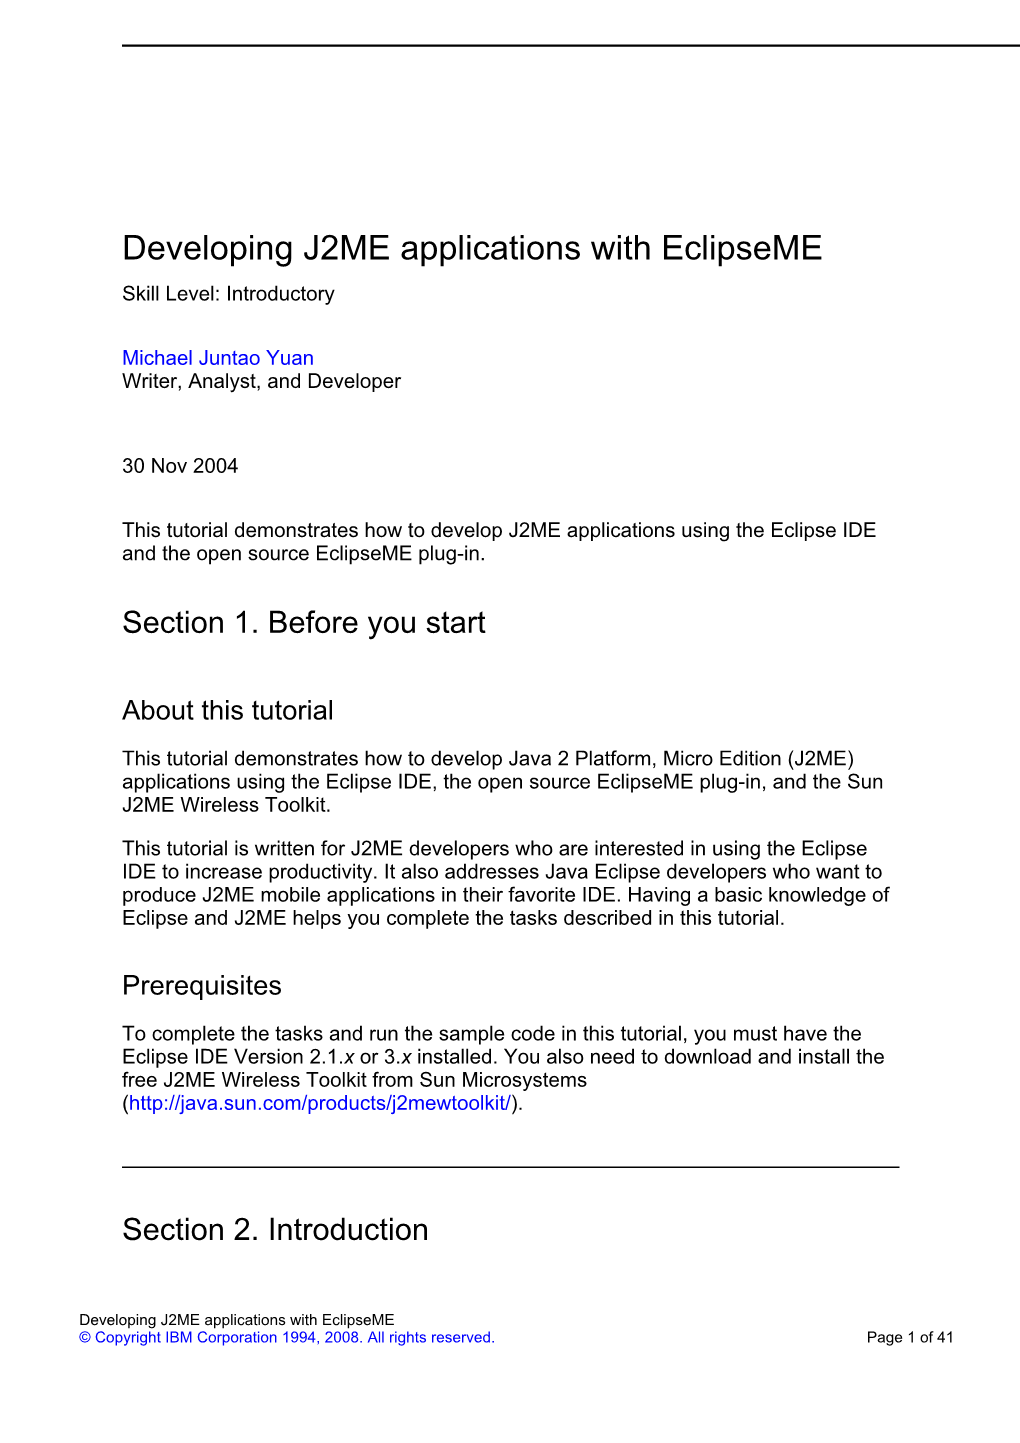 Developing J2ME Applications with Eclipseme Skill Level: Introductory